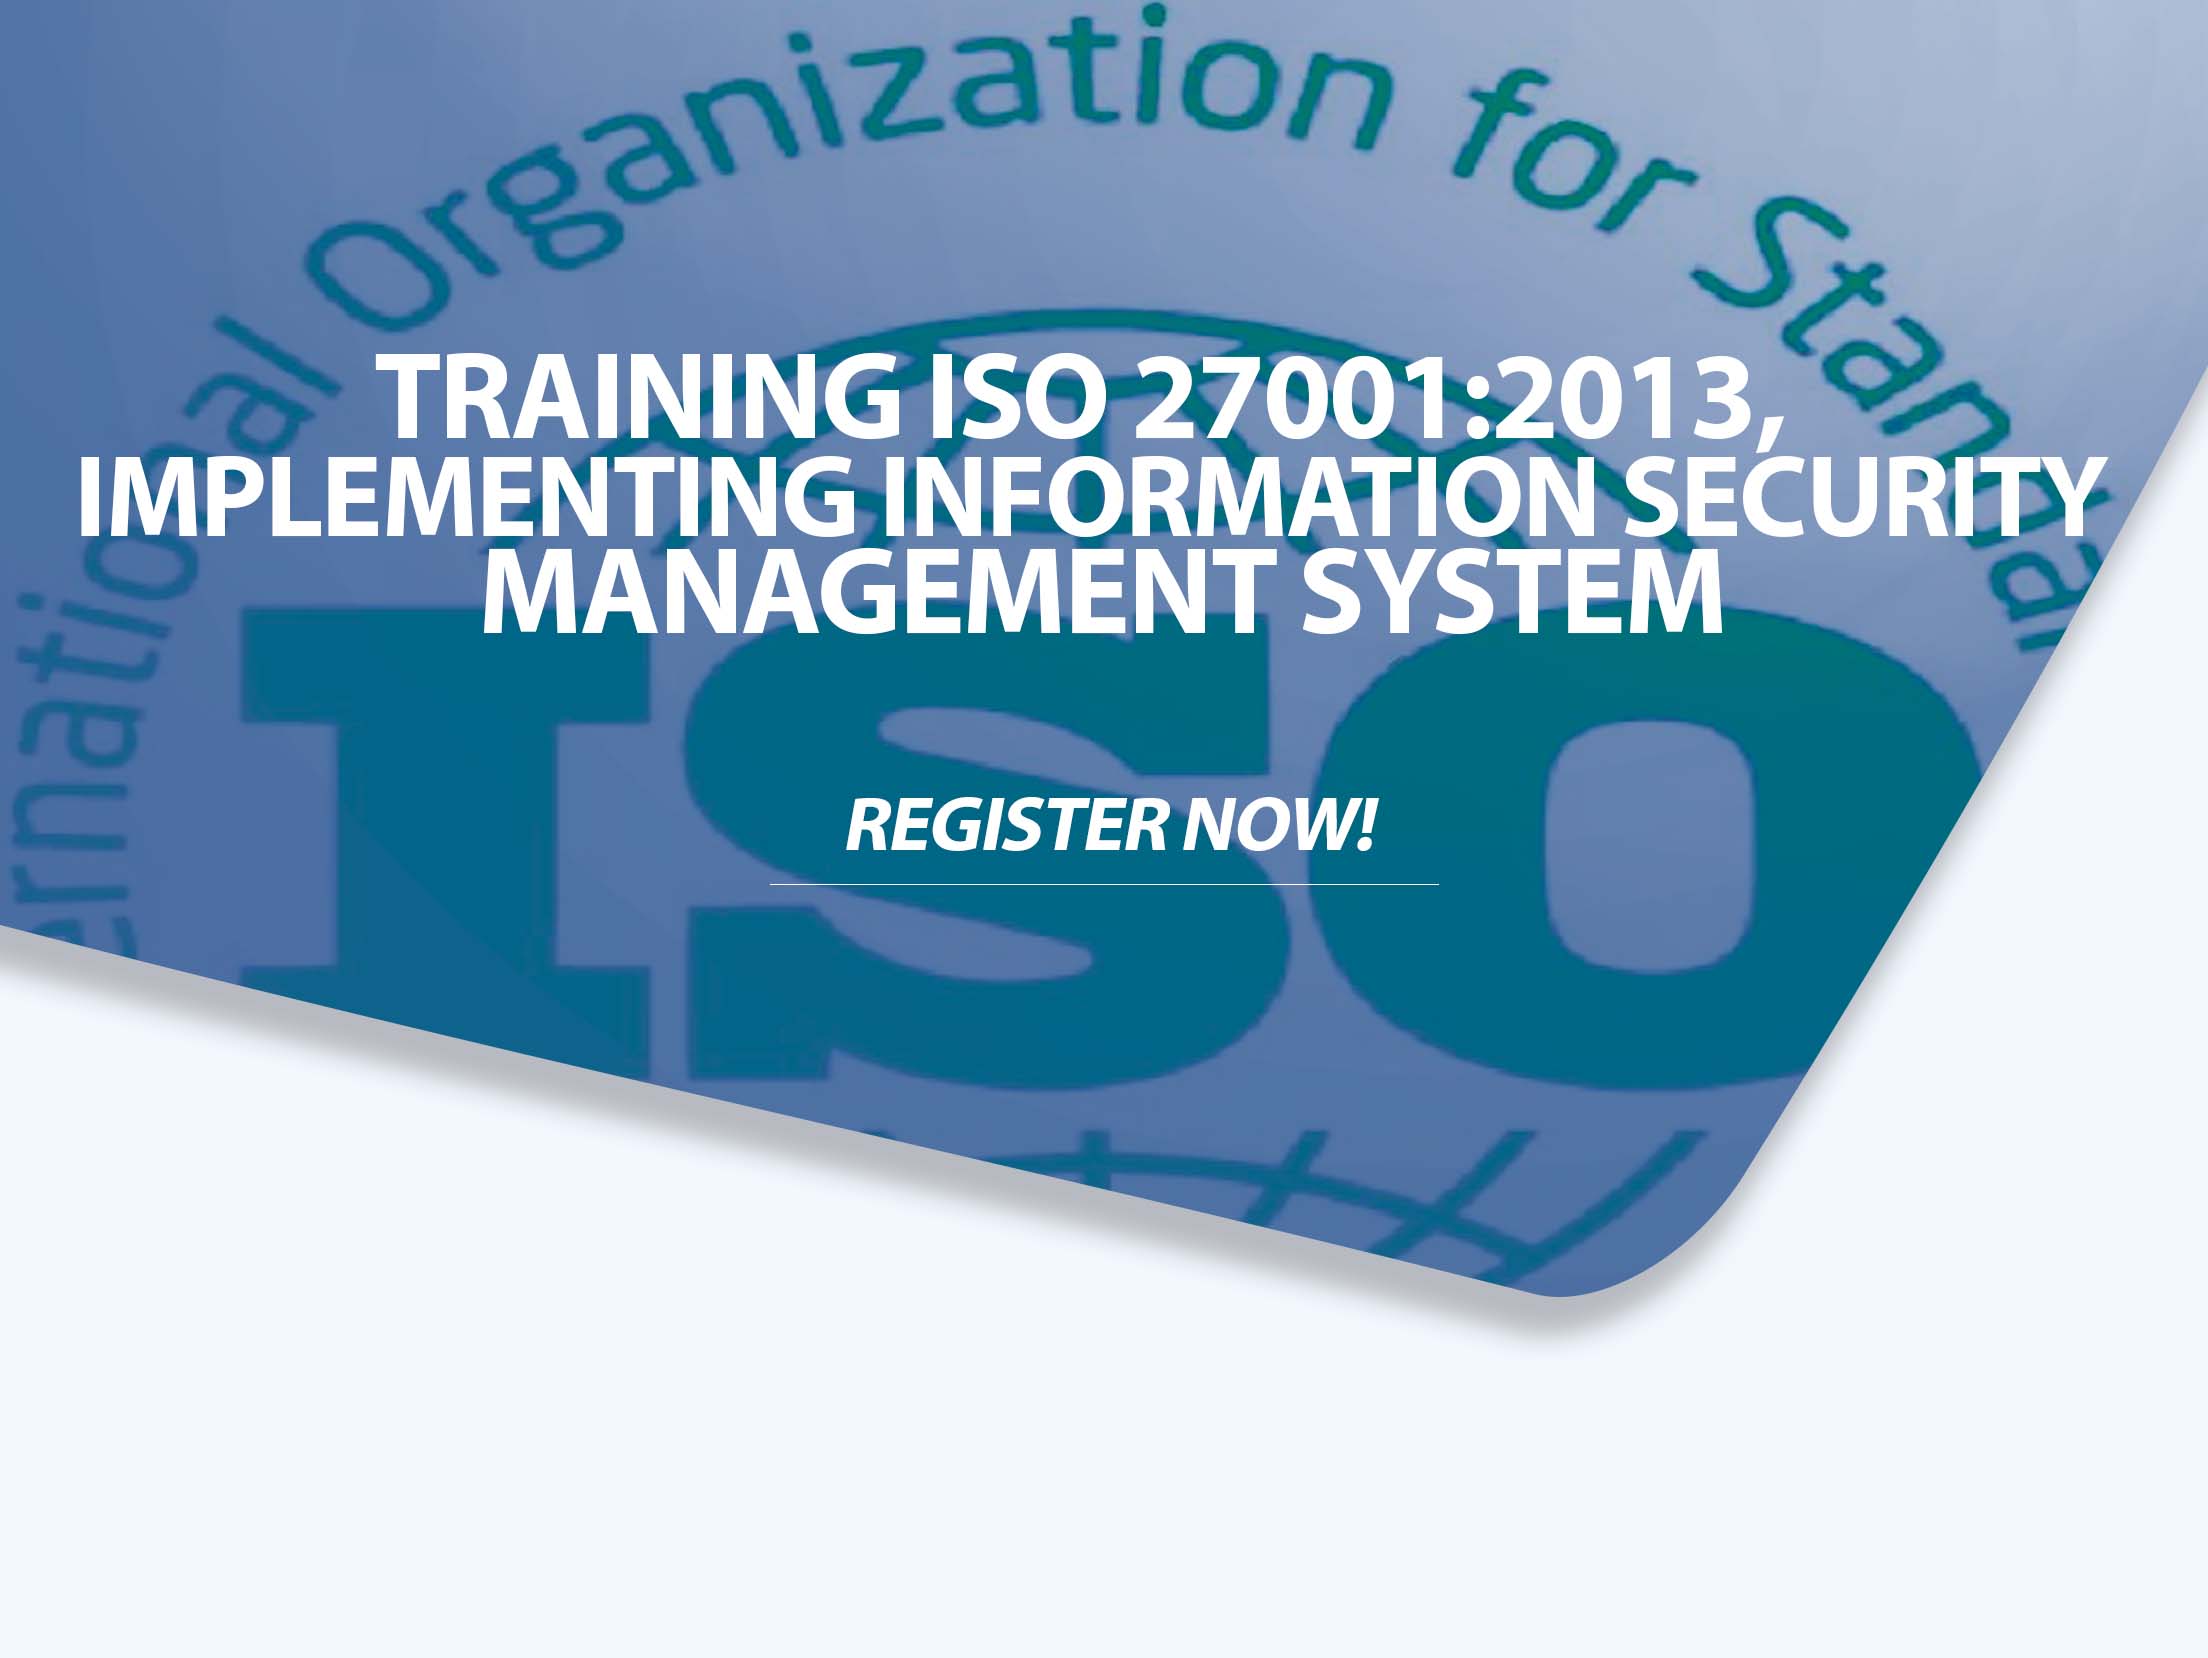 Implementing Information Security Management System